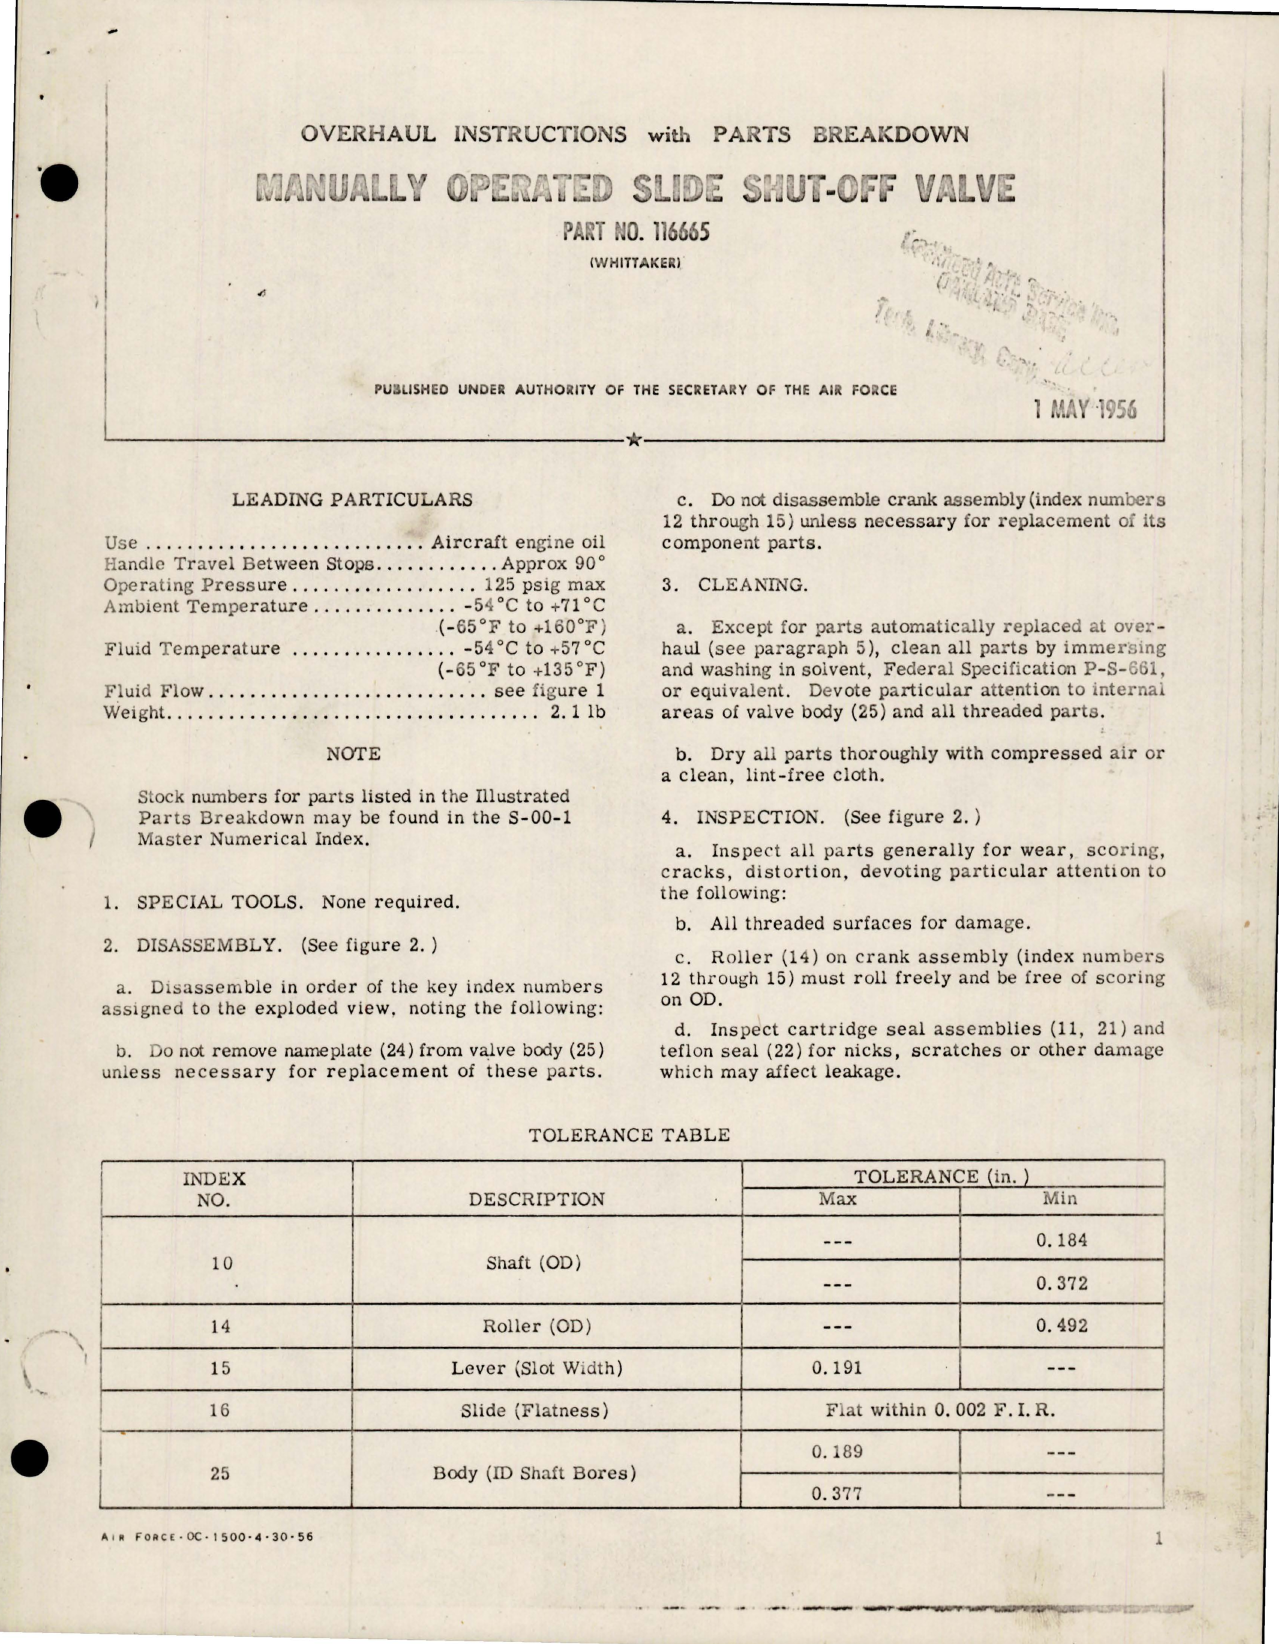 Sample page 1 from AirCorps Library document: Overhaul Instructions with Parts for Manually Operated Slide Shut-Off Valve - Part 116665 